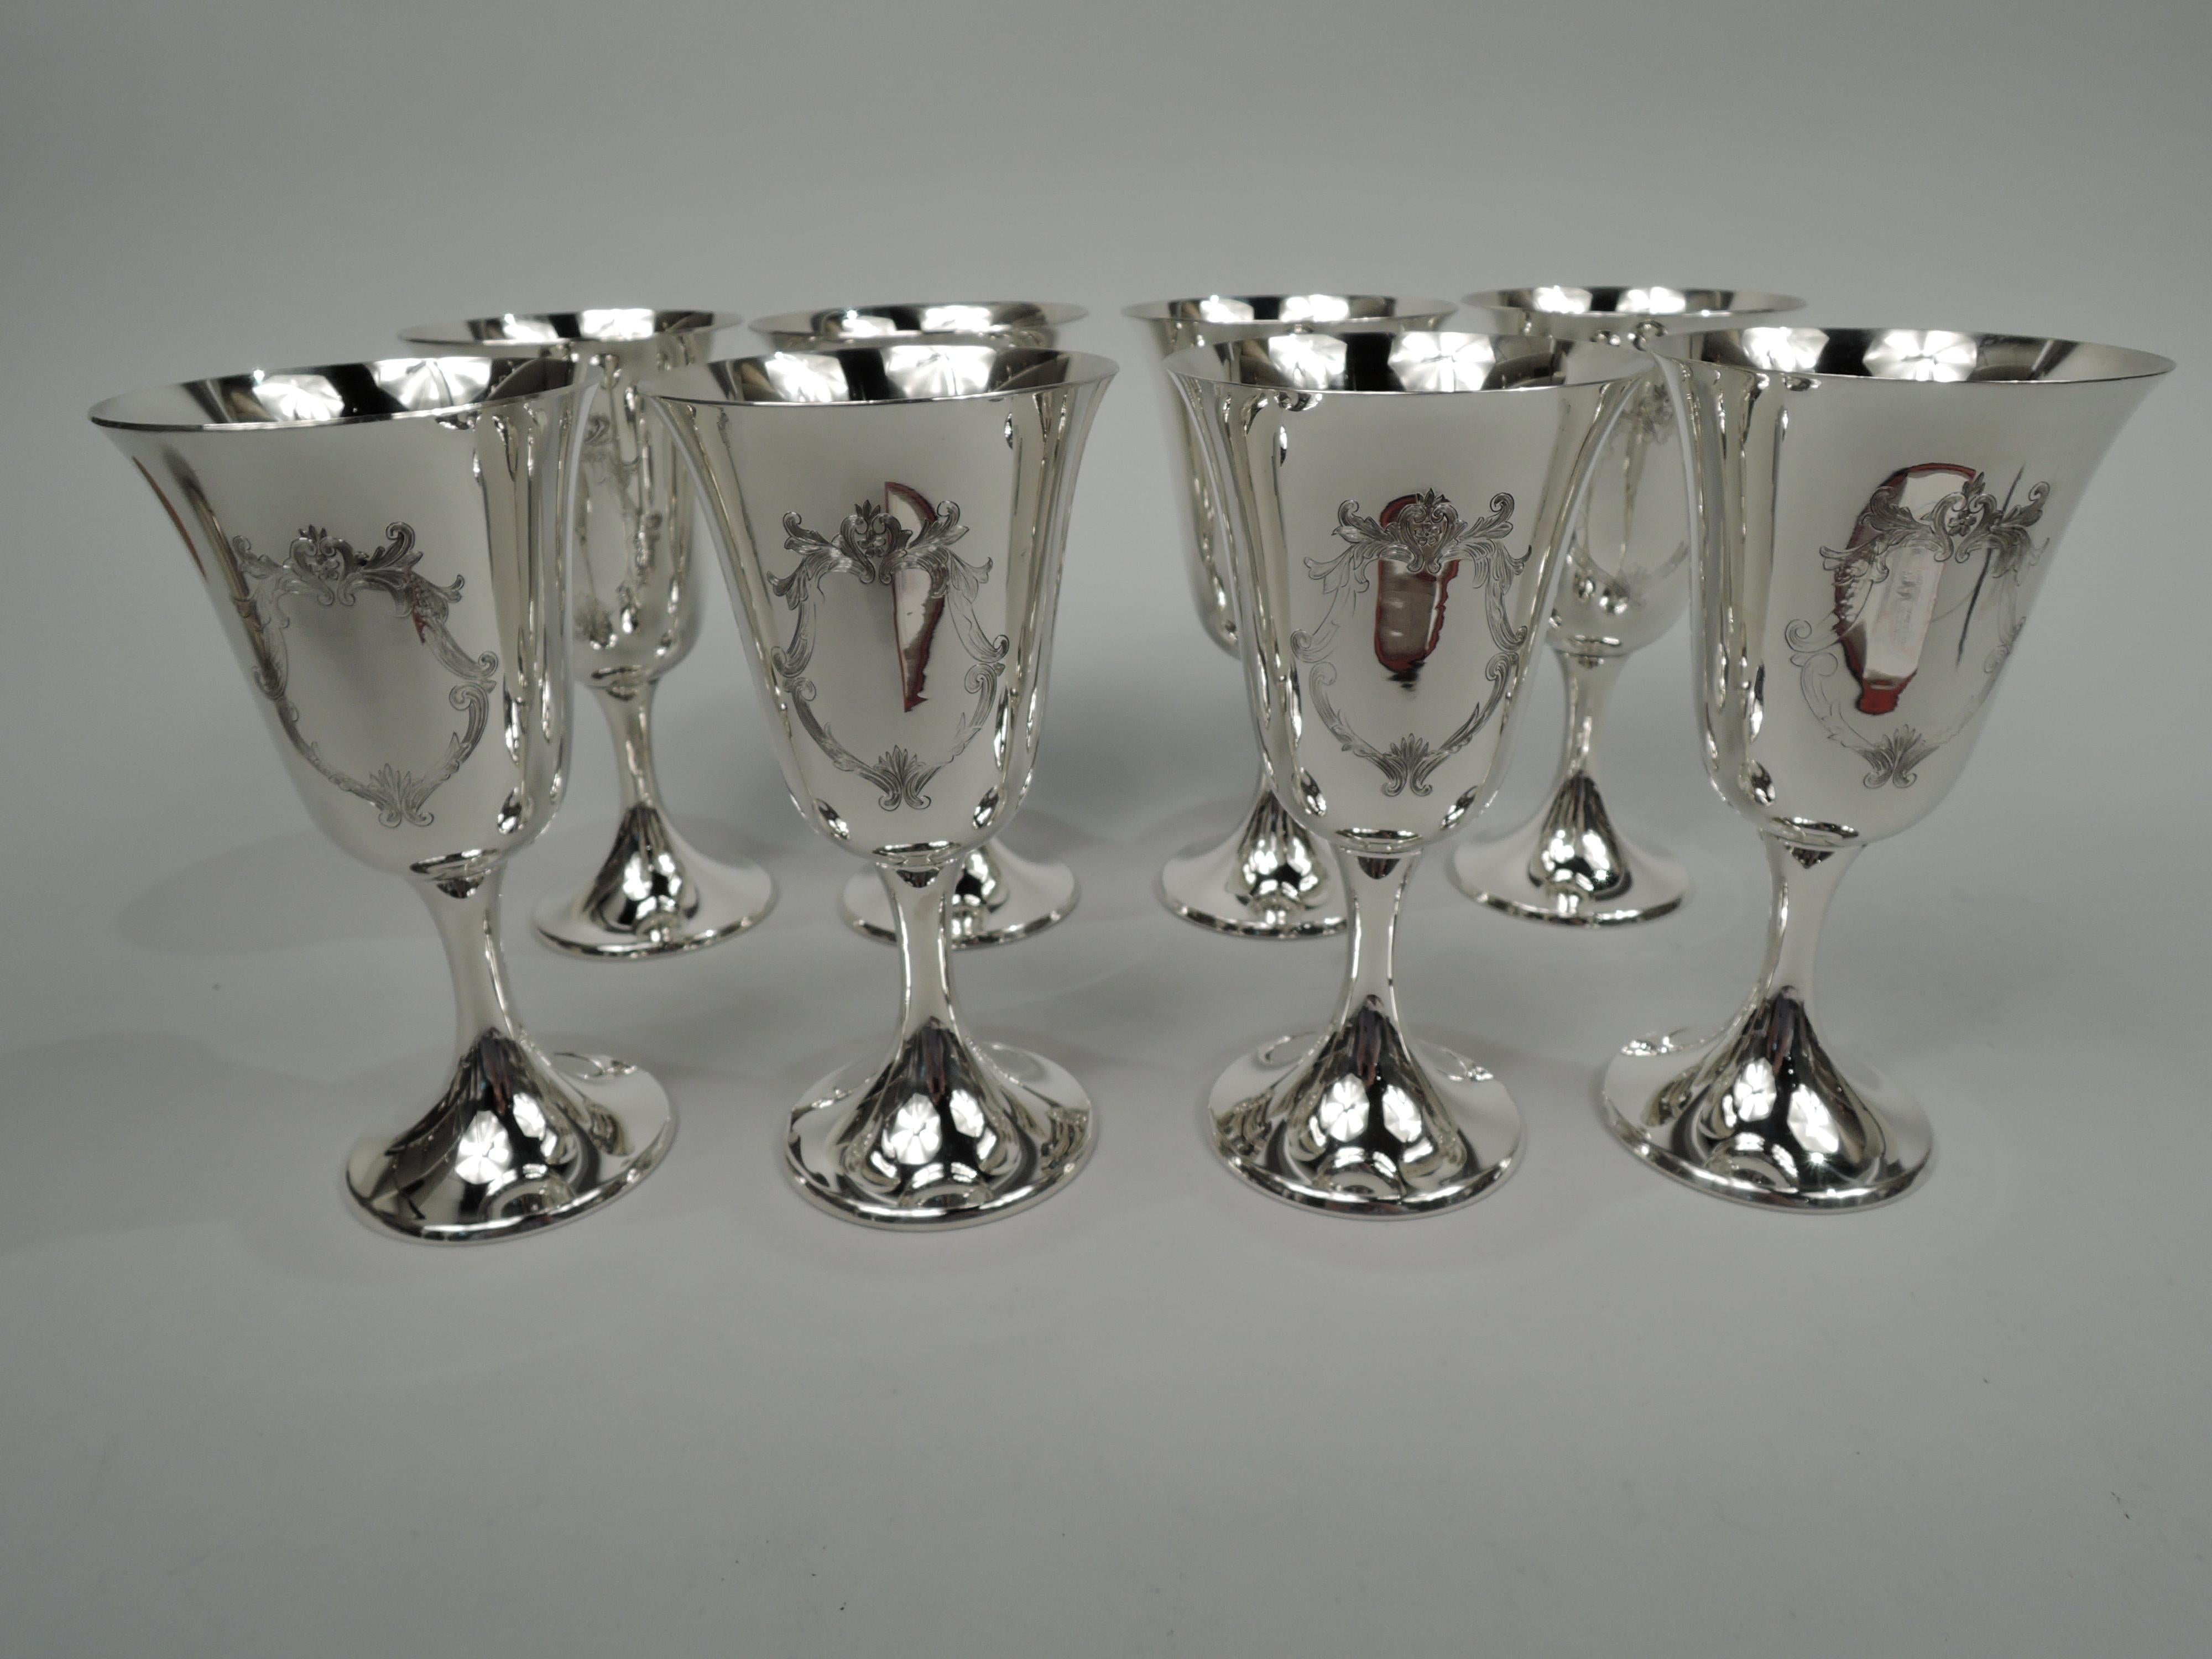 Set of 8 Engraved Puritan sterling silver goblets. Made by Gorham in Providence. Each: Spare and elegant form with subtle bell-form bowl on cylindrical stem flowing into raised foot. Engraved leafing scroll frame (vacant). Works best when filled and